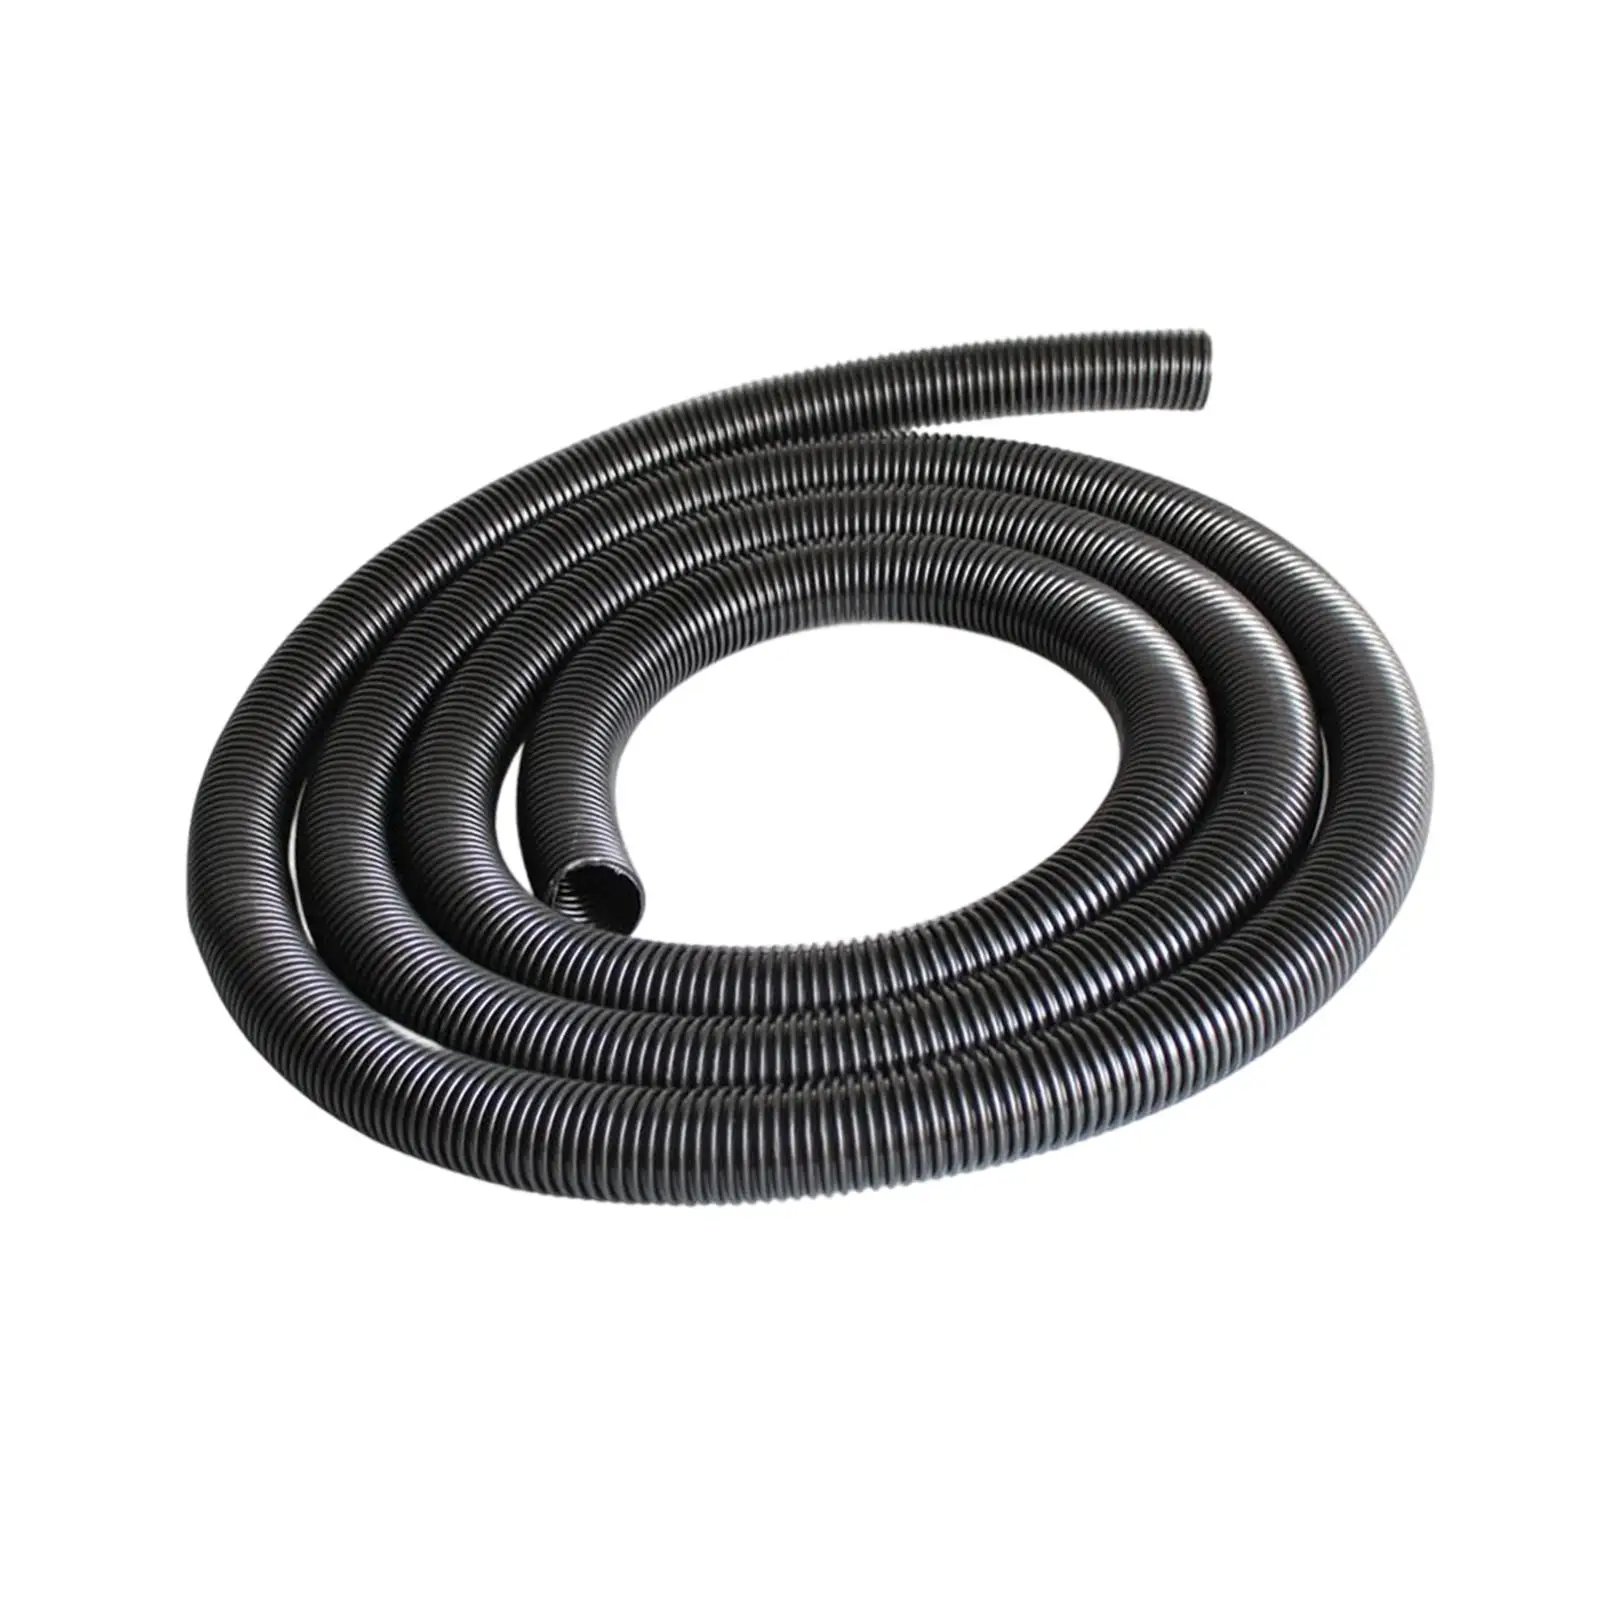 Replacement Vacuums Hose Accs 200cm Durable Fittings Universal for Cleaning Supplies